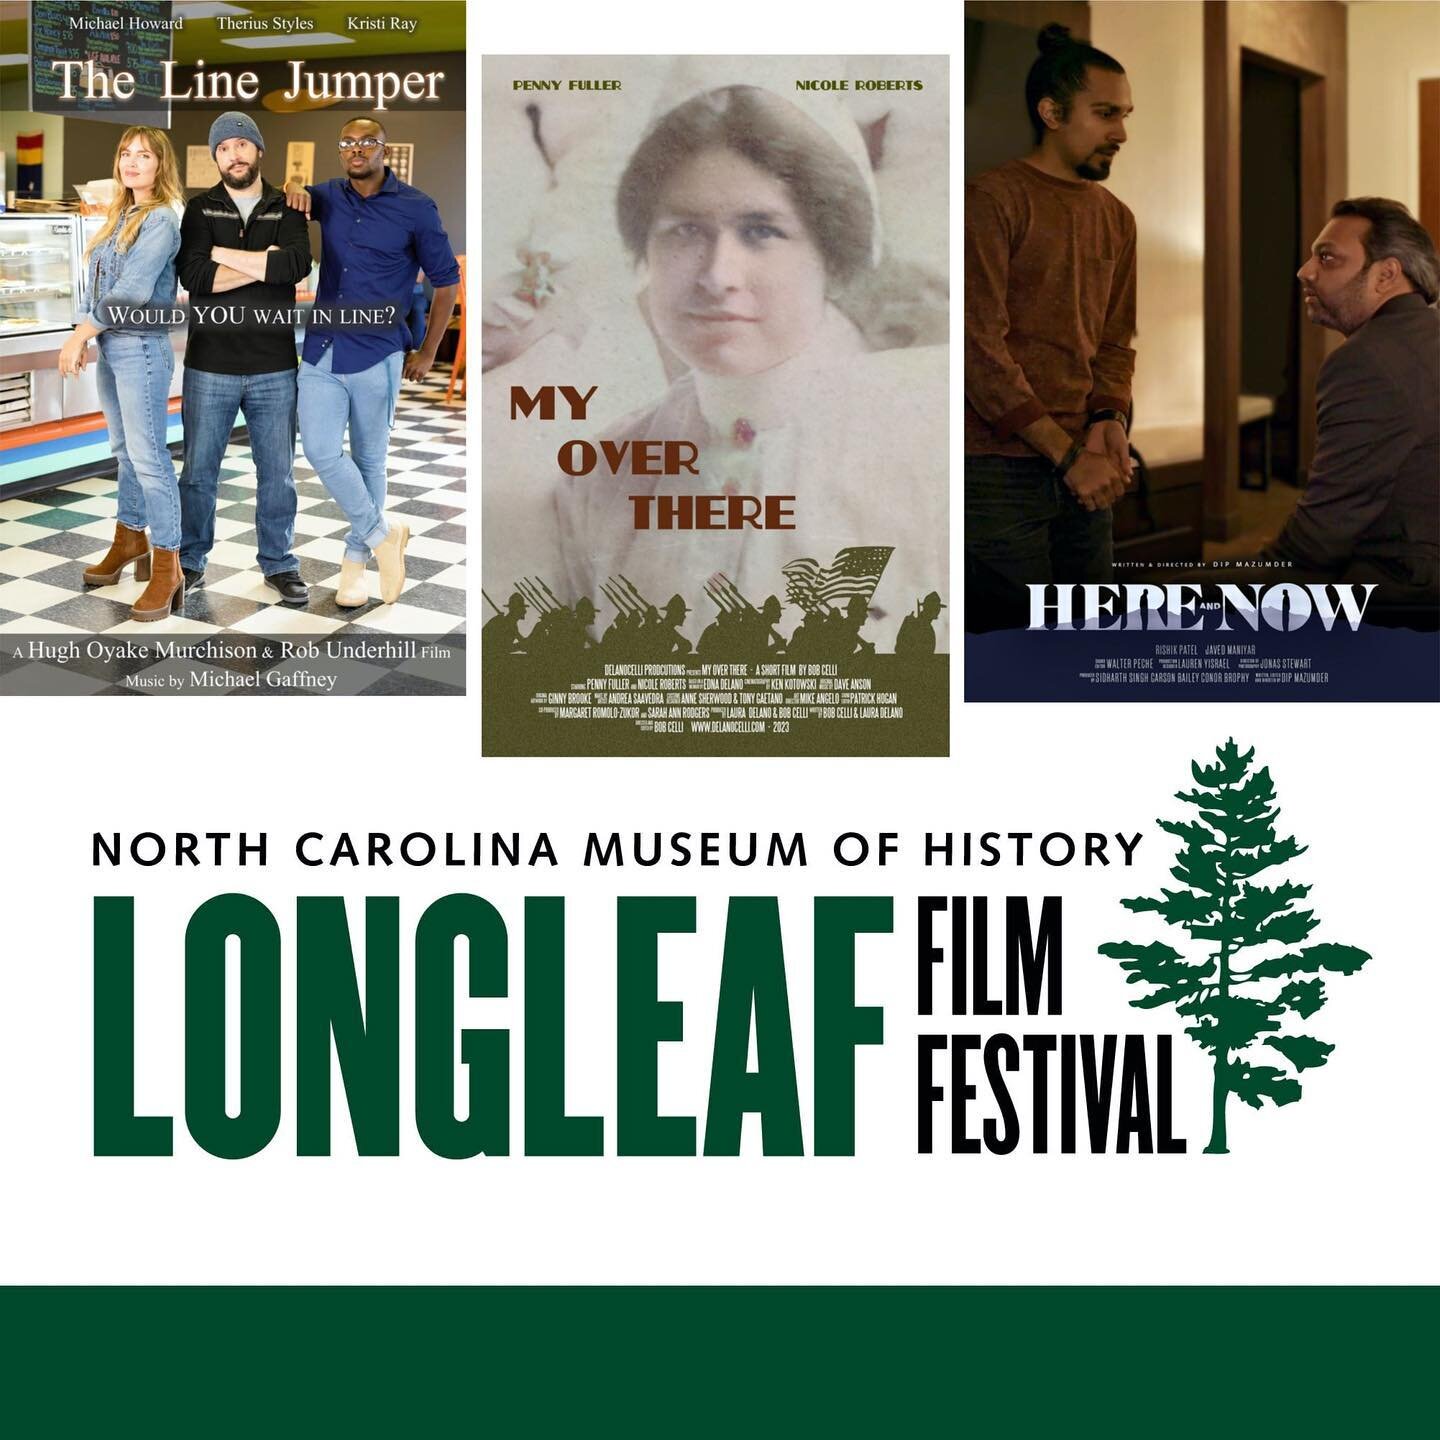 The cast and crew of OH CRAPPY DAY will be well represented at the @longleaffilmfestival, which opens this Friday, May 12, at the North Carolina Museum of History.

Two of our actors have new films screening at the festival. Michael Howard stars in T